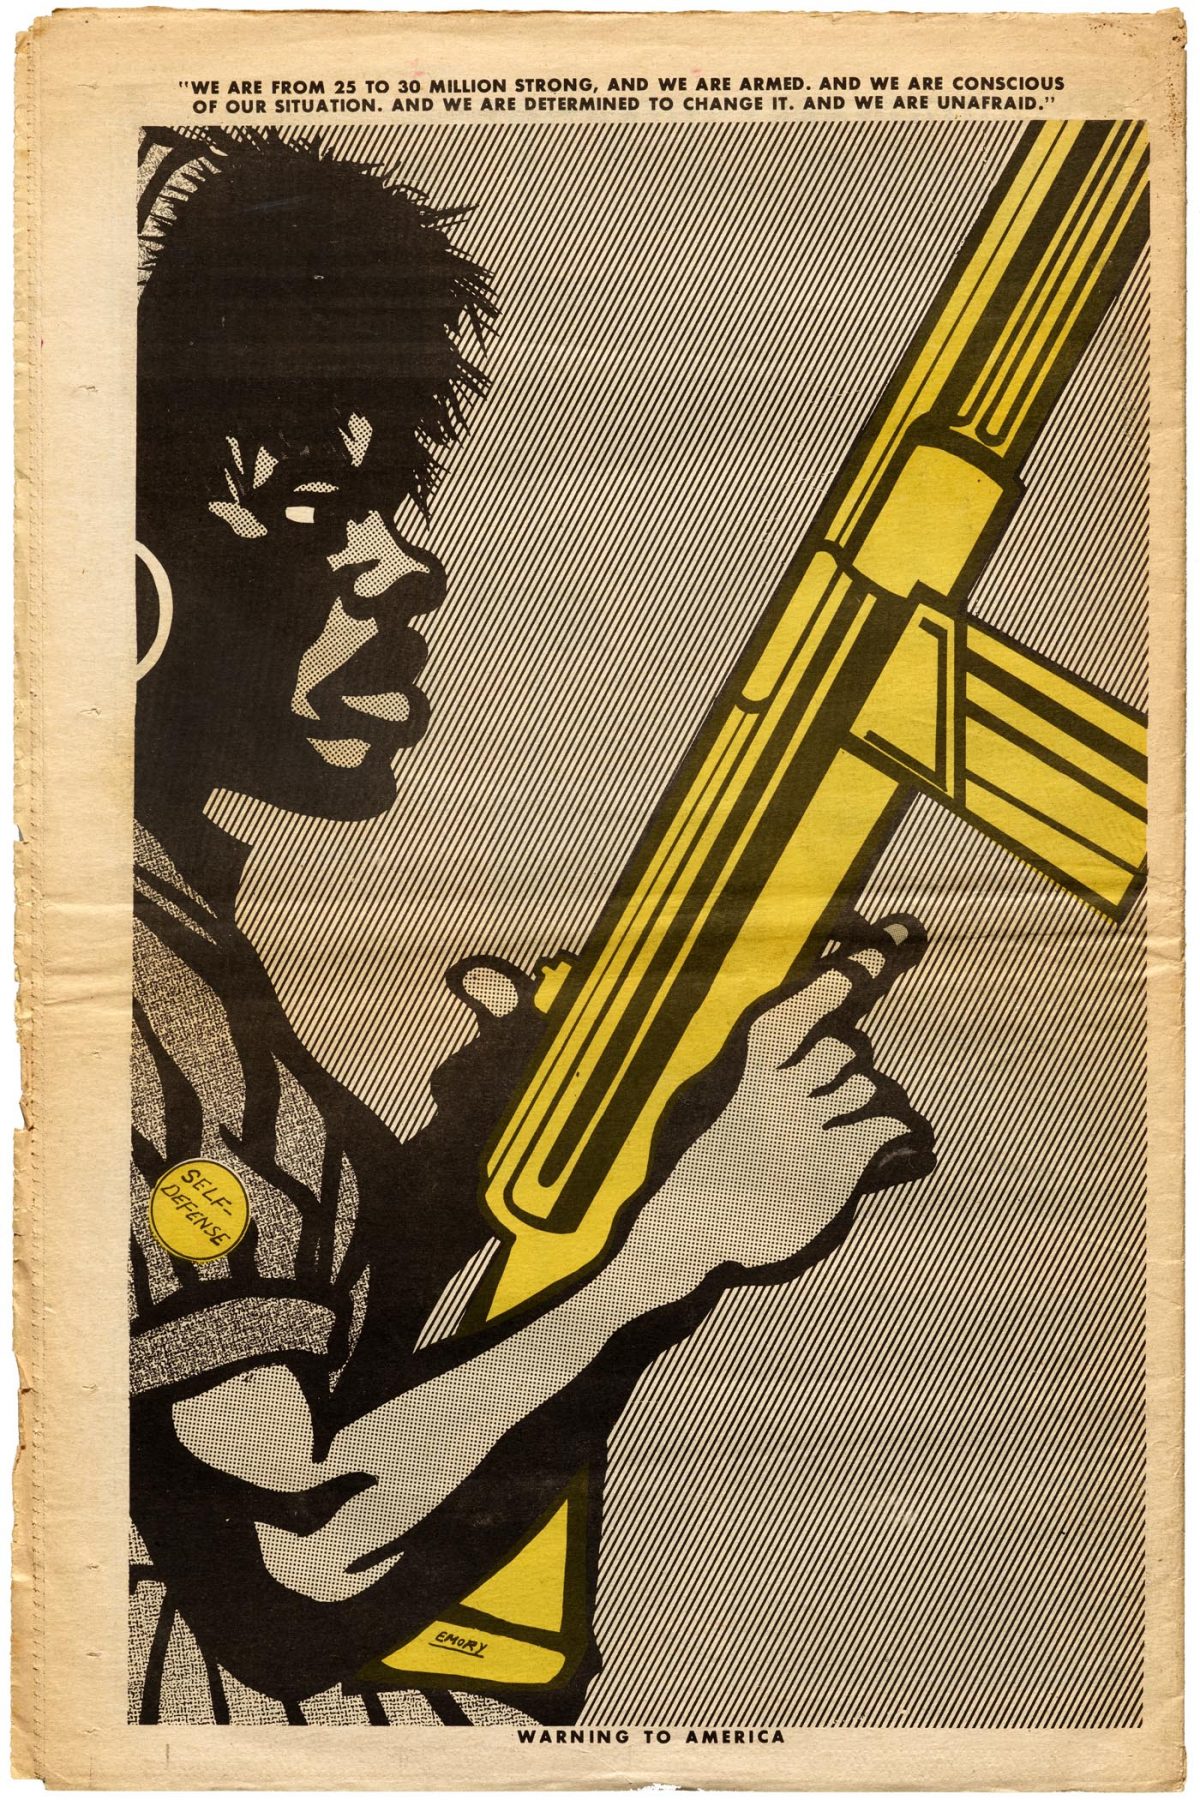 The Radical Art of The Black Panther, the Revolution's Newspaper